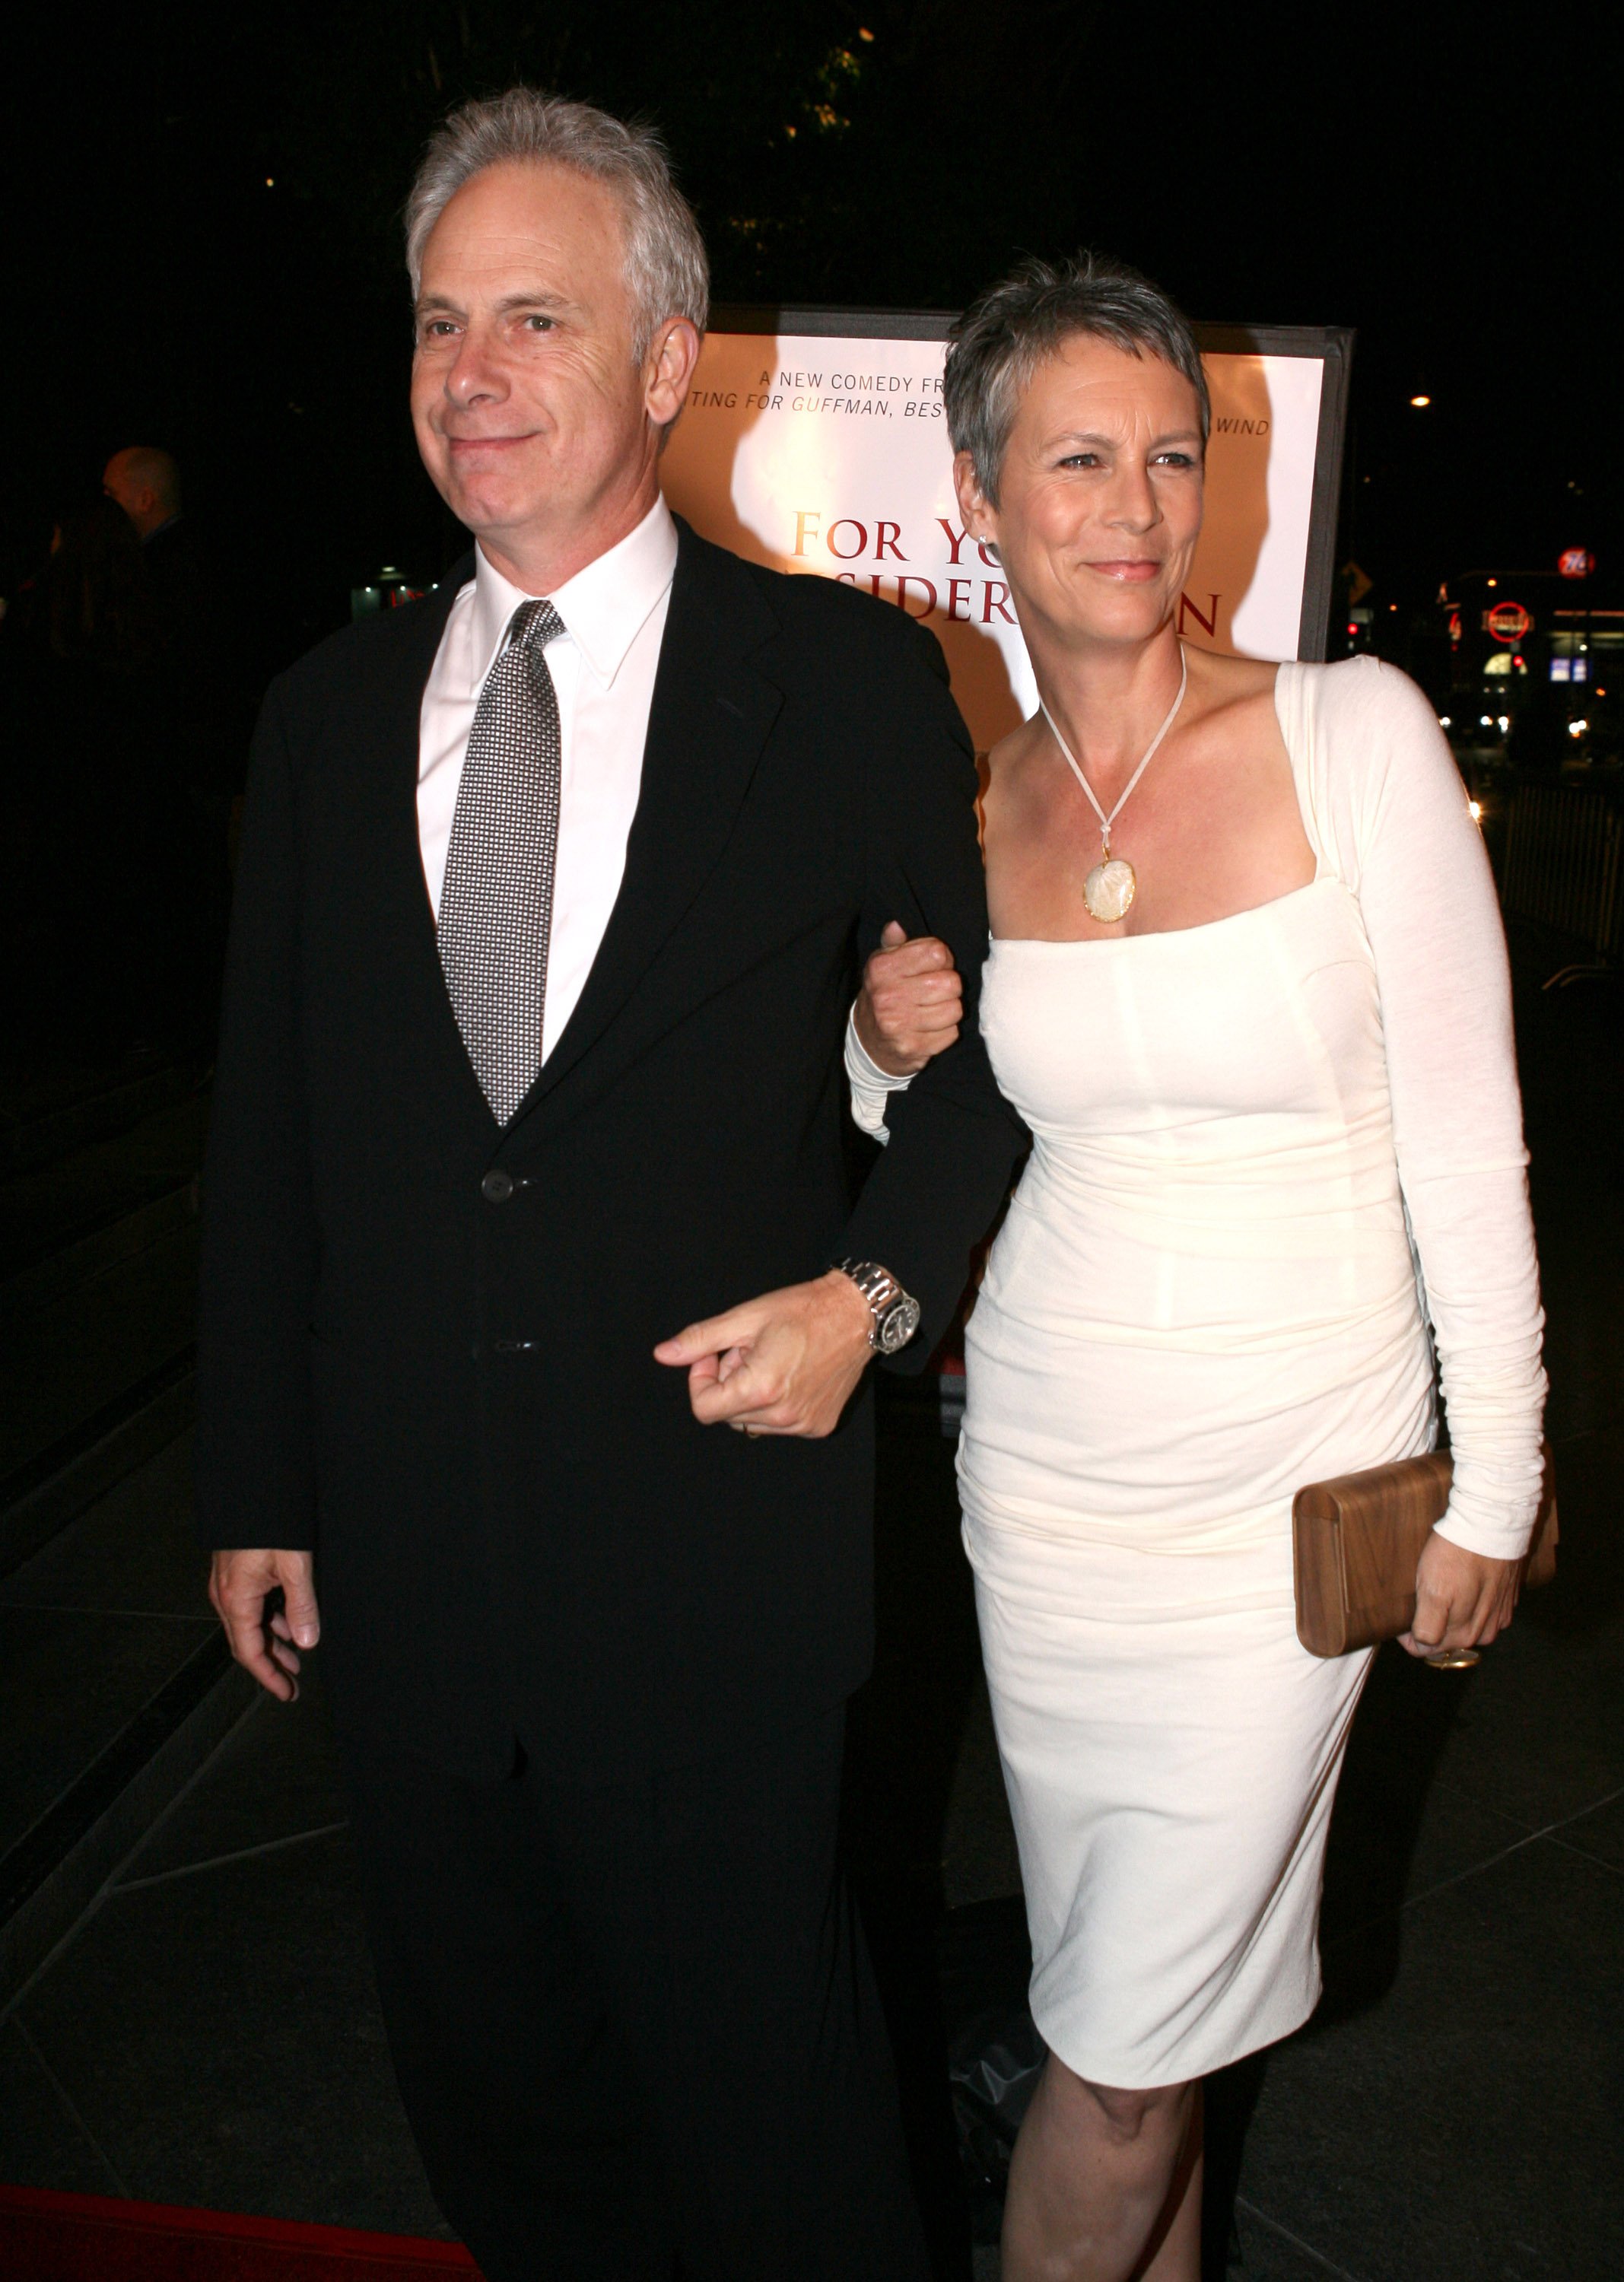 Christopher Guest and his wife Jamie Lee Curtis attend the "For Your Consideration" premiere at the Director's Guild of America in Beverly Hills, California. | Source: Getty Images